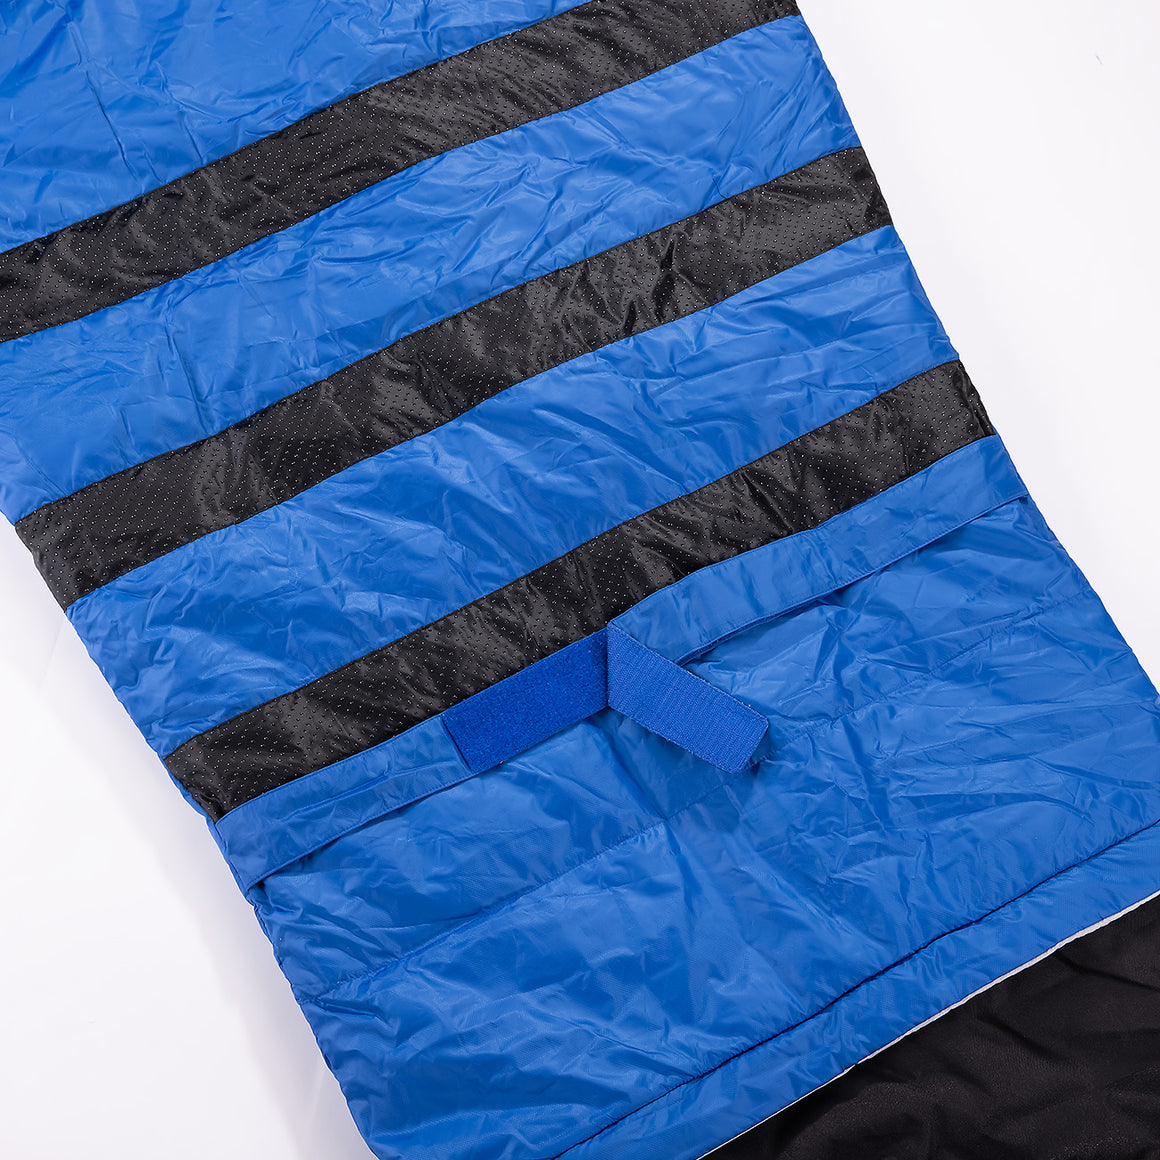 Cozybag Zippy - our extra wide sleeping bag with sleeves